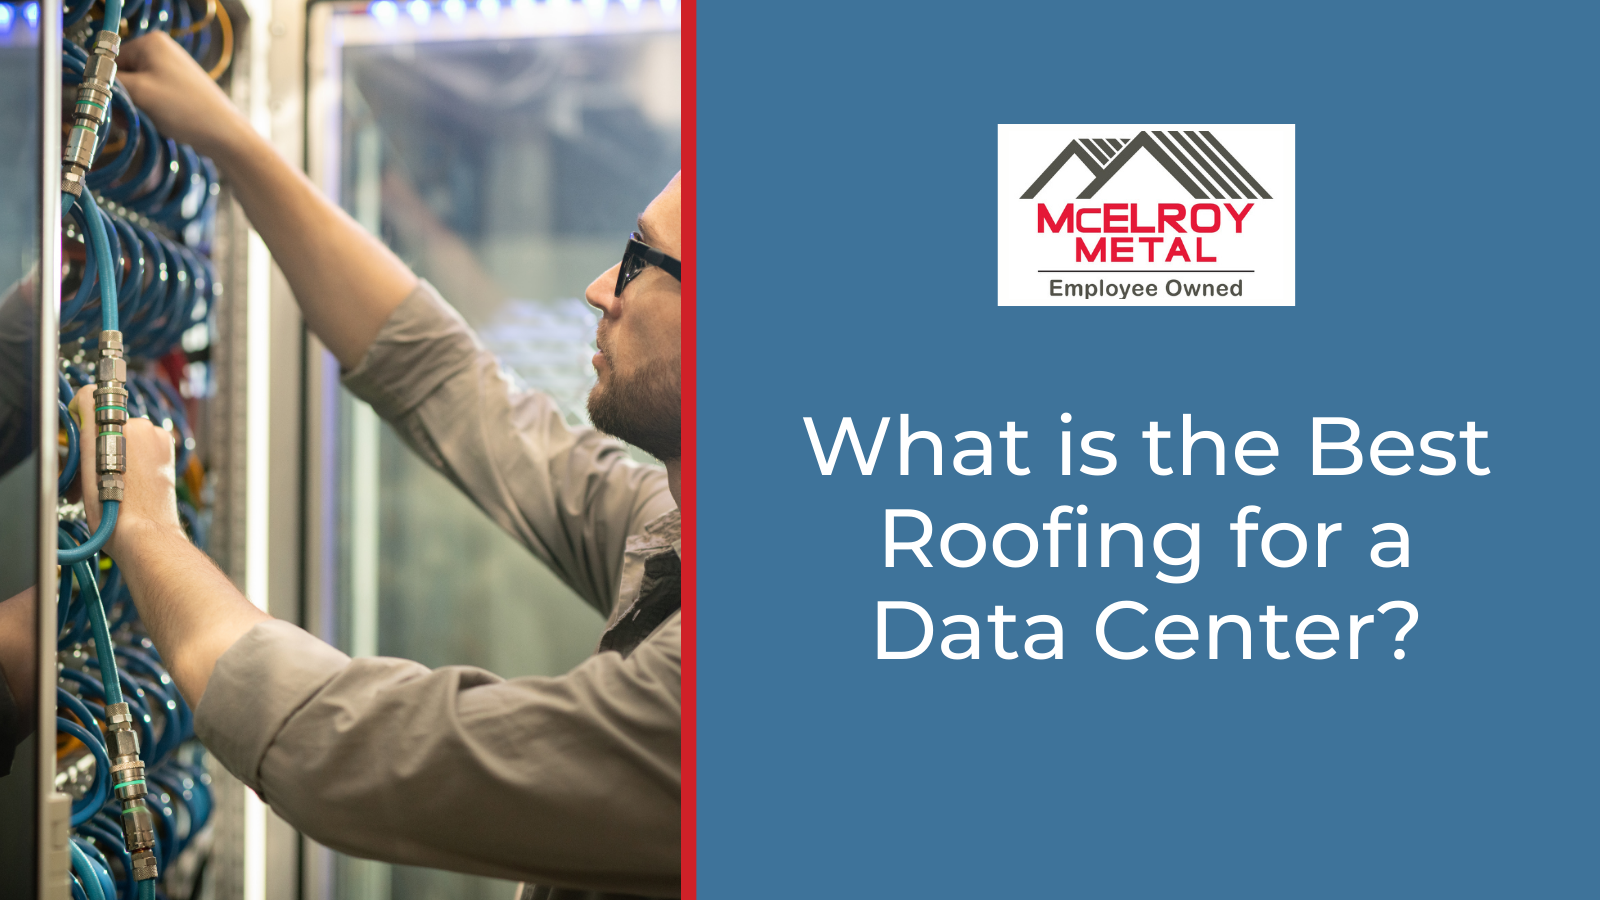 What Is the Best Roofing for a Data Center?